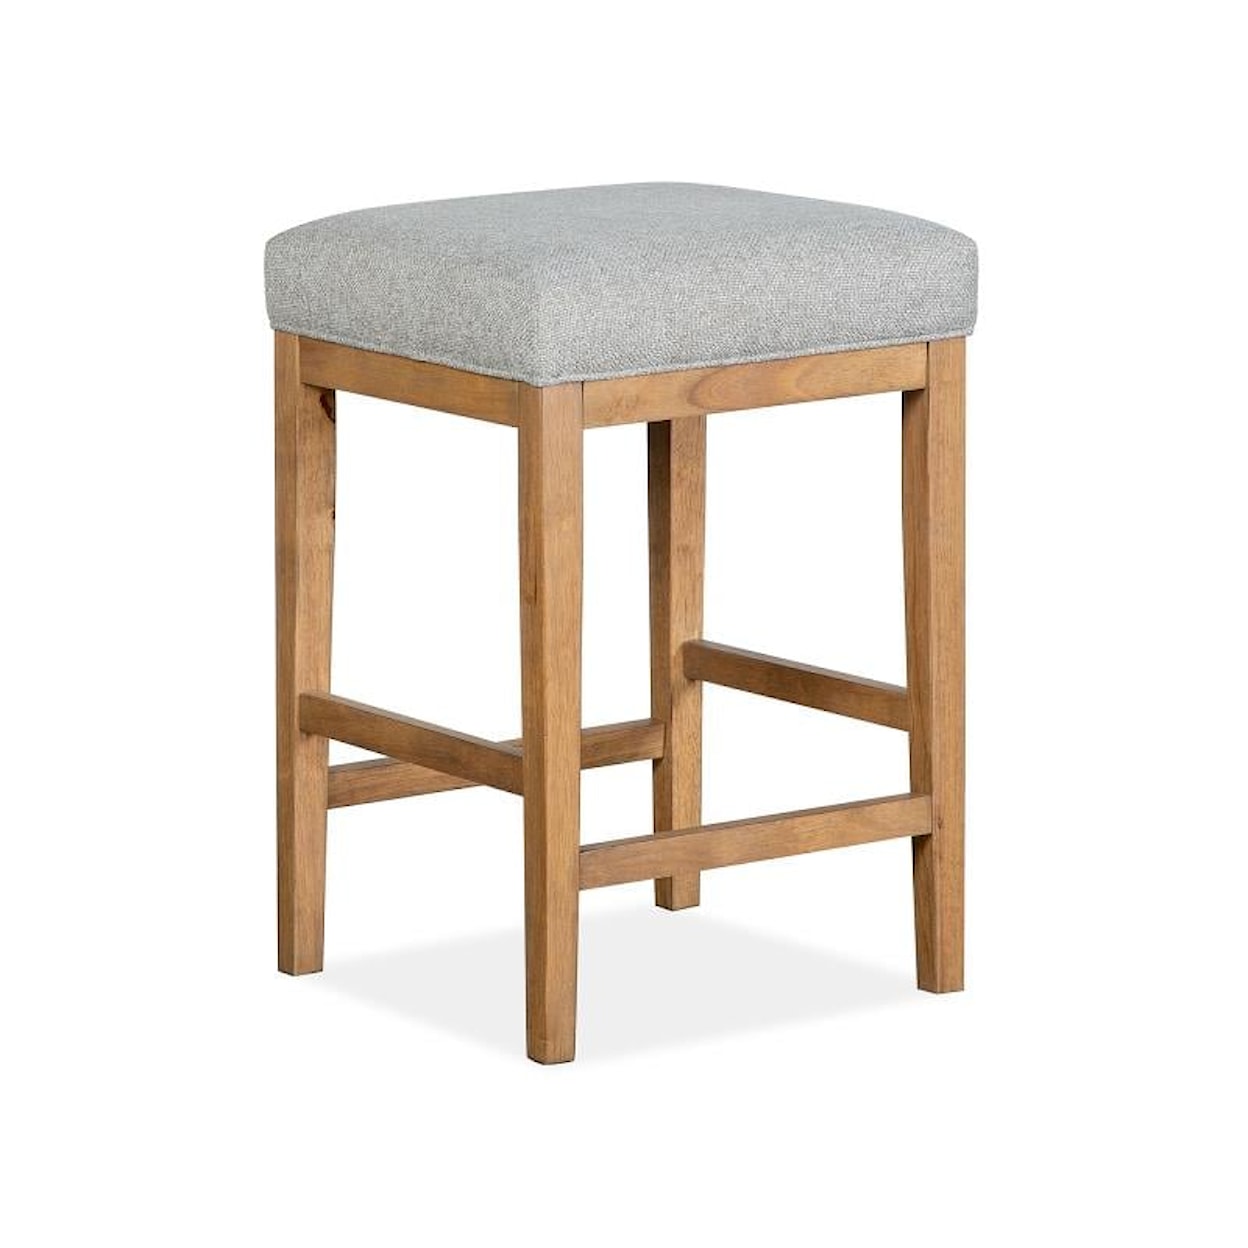 Magnussen Home Lindon Occasional Tables Wood Stool with Upholstered Seat